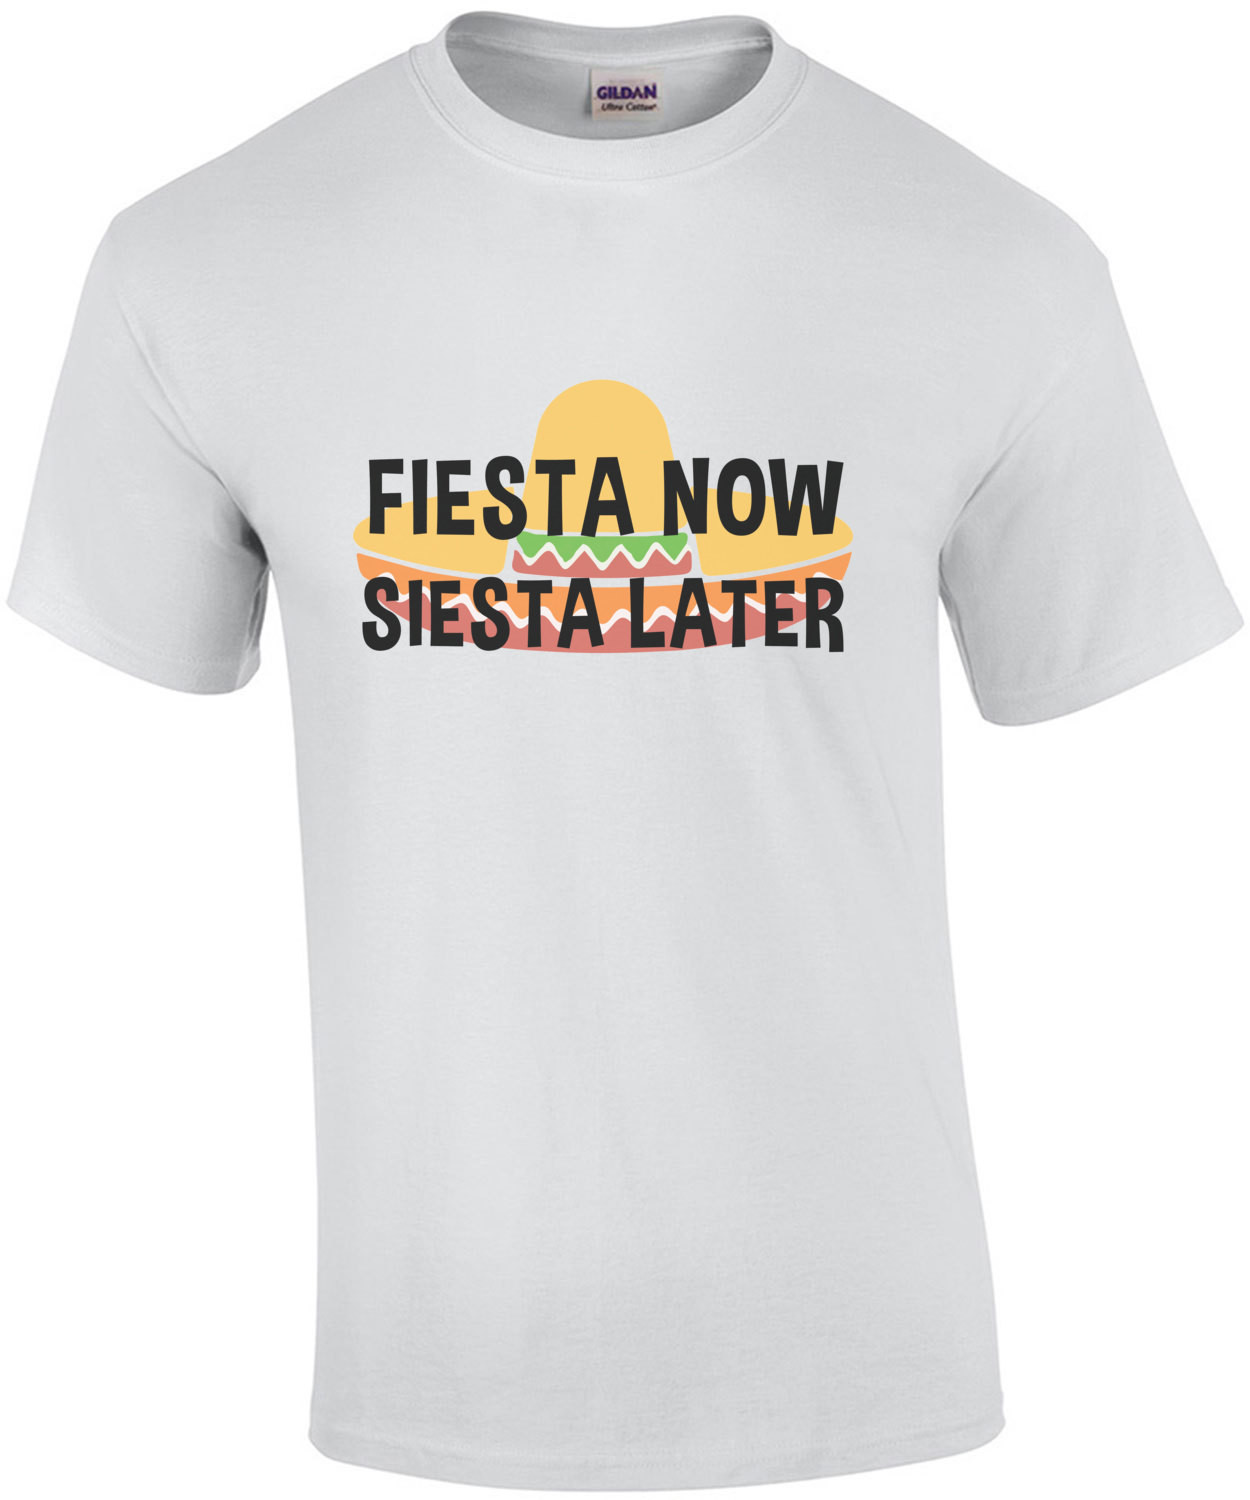 Fiesta Now Siesta Later - Party T-Shirt